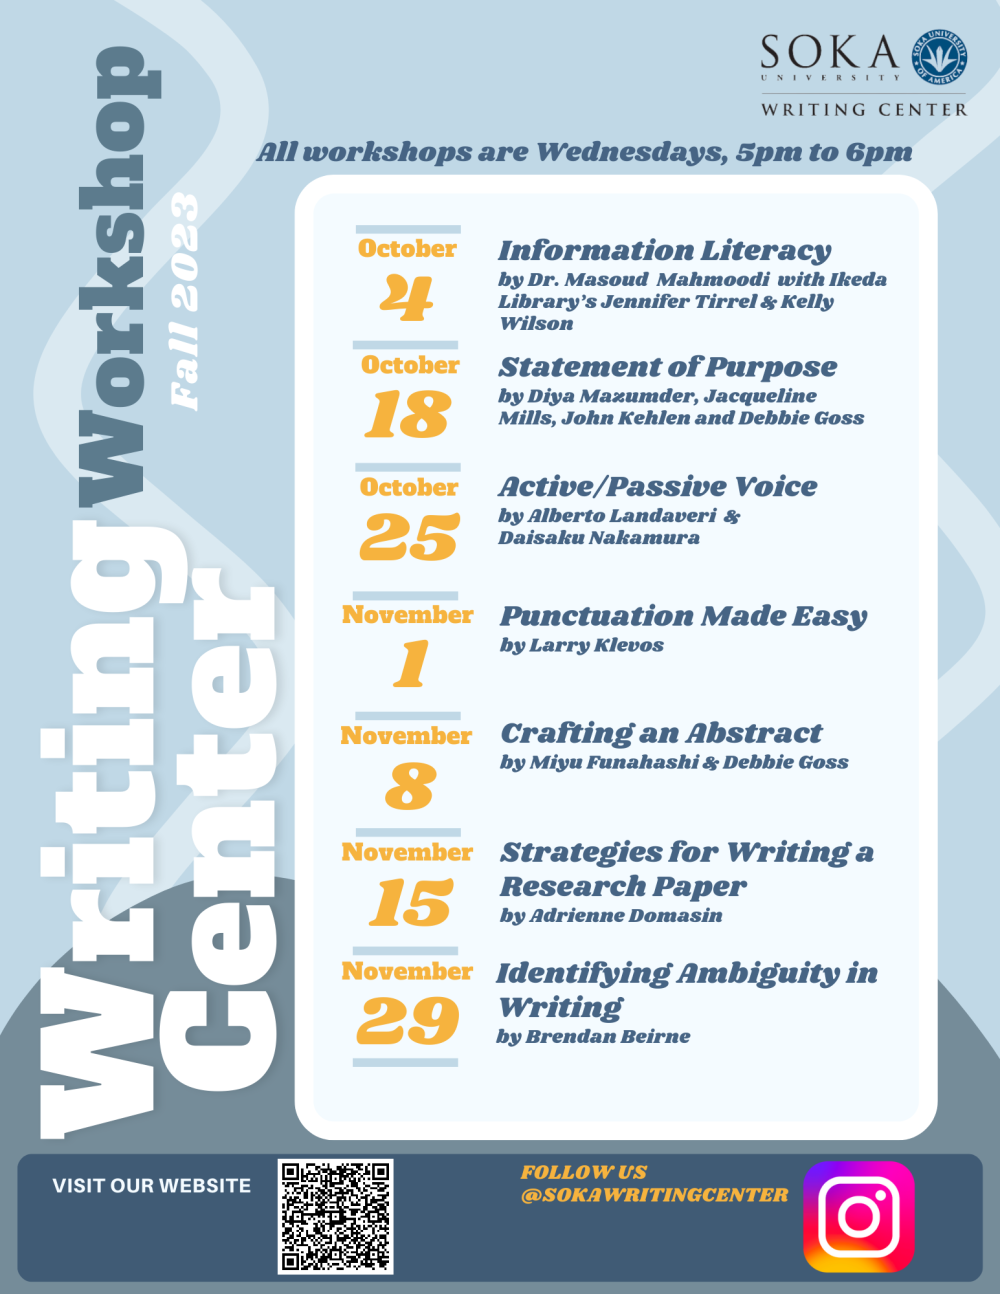 October 4: Information Literacy; October 18: Statement of Purpose; October 25: Active/Passive Voice; November 1: Punctuation Made Easy; November 8: Crafting an Abstract; November 15: Strategies for Writing a Research Paper; November 29: Identifying Ambiguity in Writing